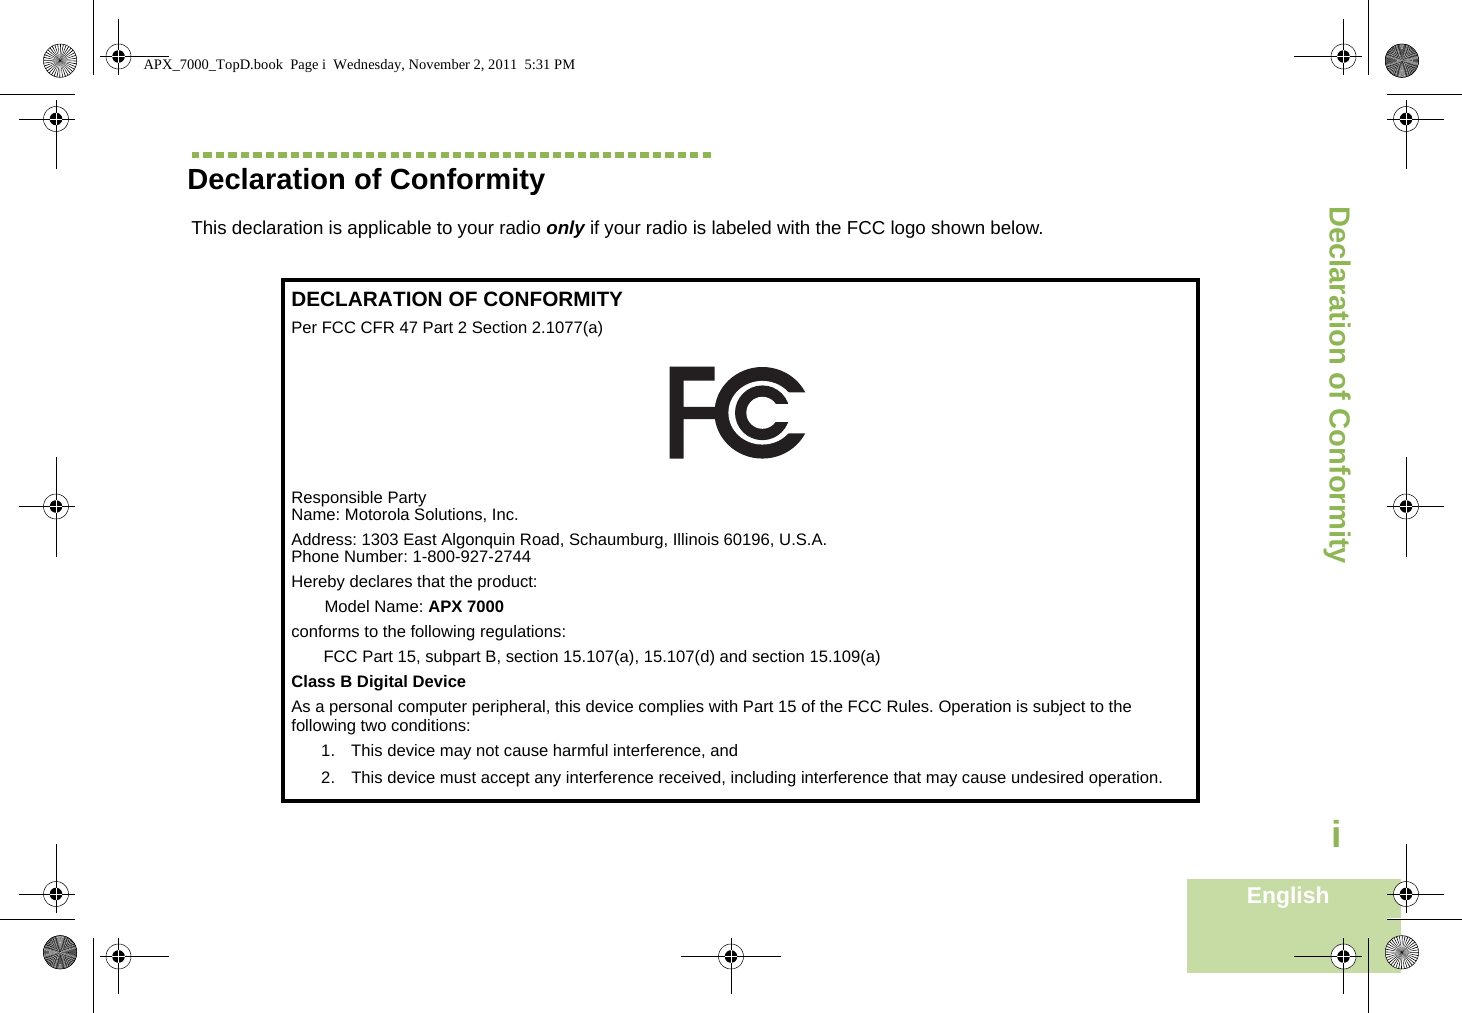 Declaration of ConformityEnglishiDeclaration of Conformity  This declaration is applicable to your radio only if your radio is labeled with the FCC logo shown below.DECLARATION OF CONFORMITYPer FCC CFR 47 Part 2 Section 2.1077(a)Responsible Party Name: Motorola Solutions, Inc.Address: 1303 East Algonquin Road, Schaumburg, Illinois 60196, U.S.A.Phone Number: 1-800-927-2744Hereby declares that the product:Model Name: APX 7000conforms to the following regulations:FCC Part 15, subpart B, section 15.107(a), 15.107(d) and section 15.109(a)Class B Digital DeviceAs a personal computer peripheral, this device complies with Part 15 of the FCC Rules. Operation is subject to the following two conditions:1. This device may not cause harmful interference, and 2. This device must accept any interference received, including interference that may cause undesired operation.APX_7000_TopD.book  Page i  Wednesday, November 2, 2011  5:31 PM